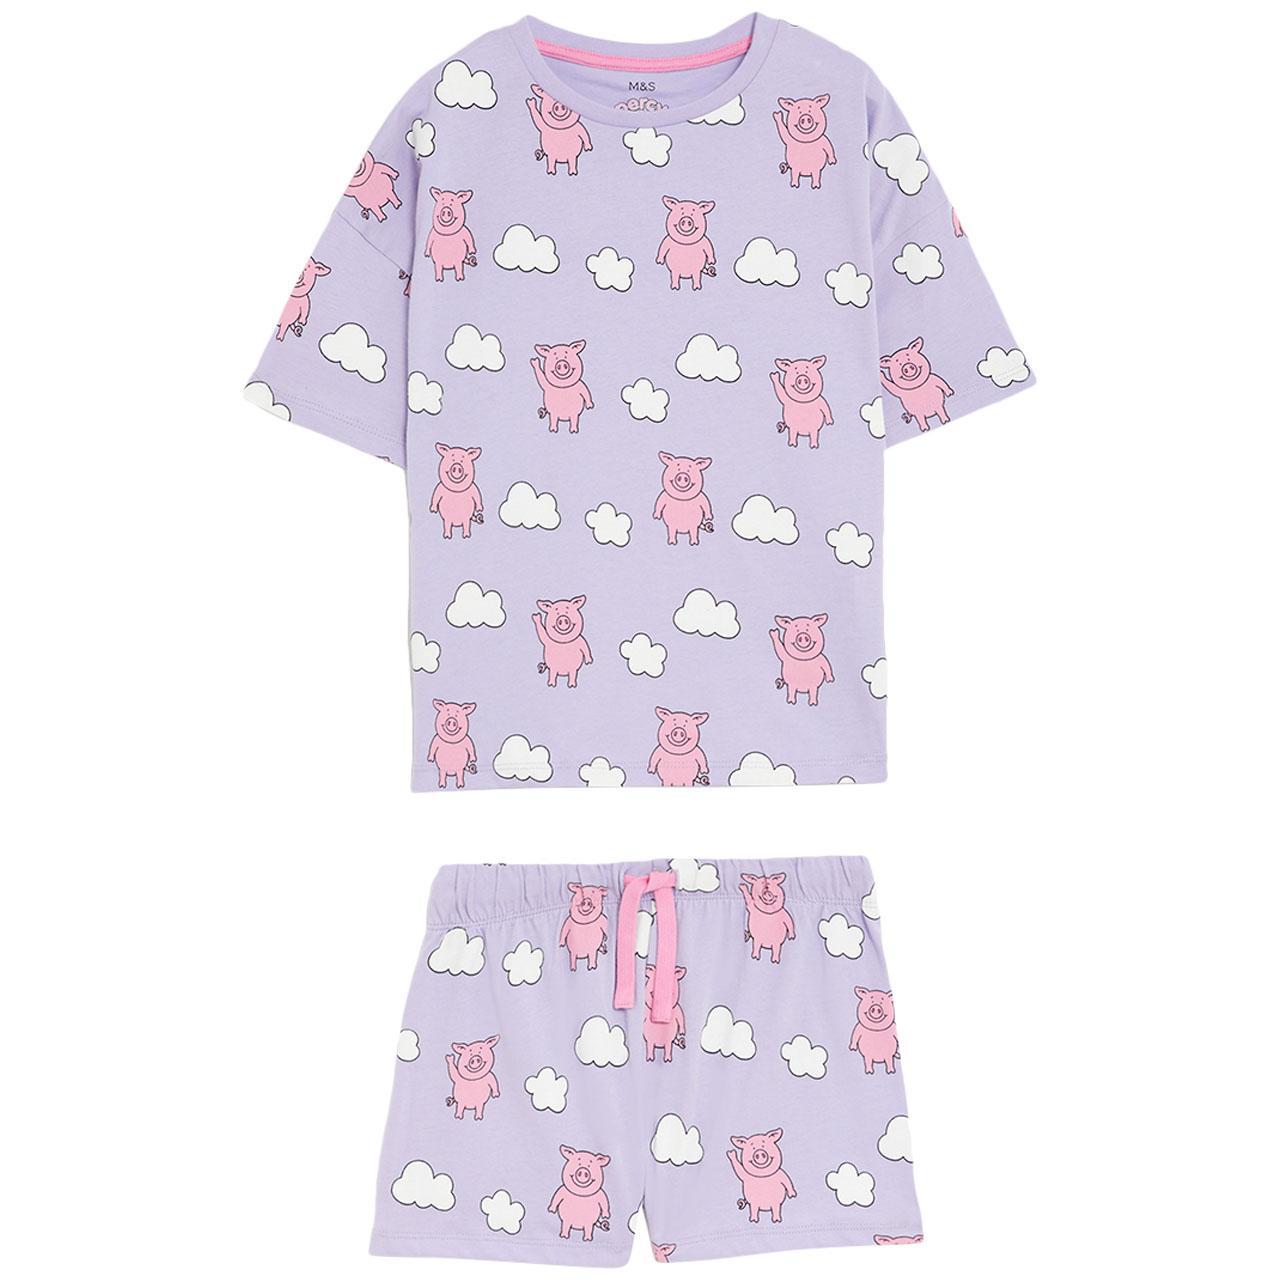 M&S Percy Pig Shorties, 9-10 Years, Lilac